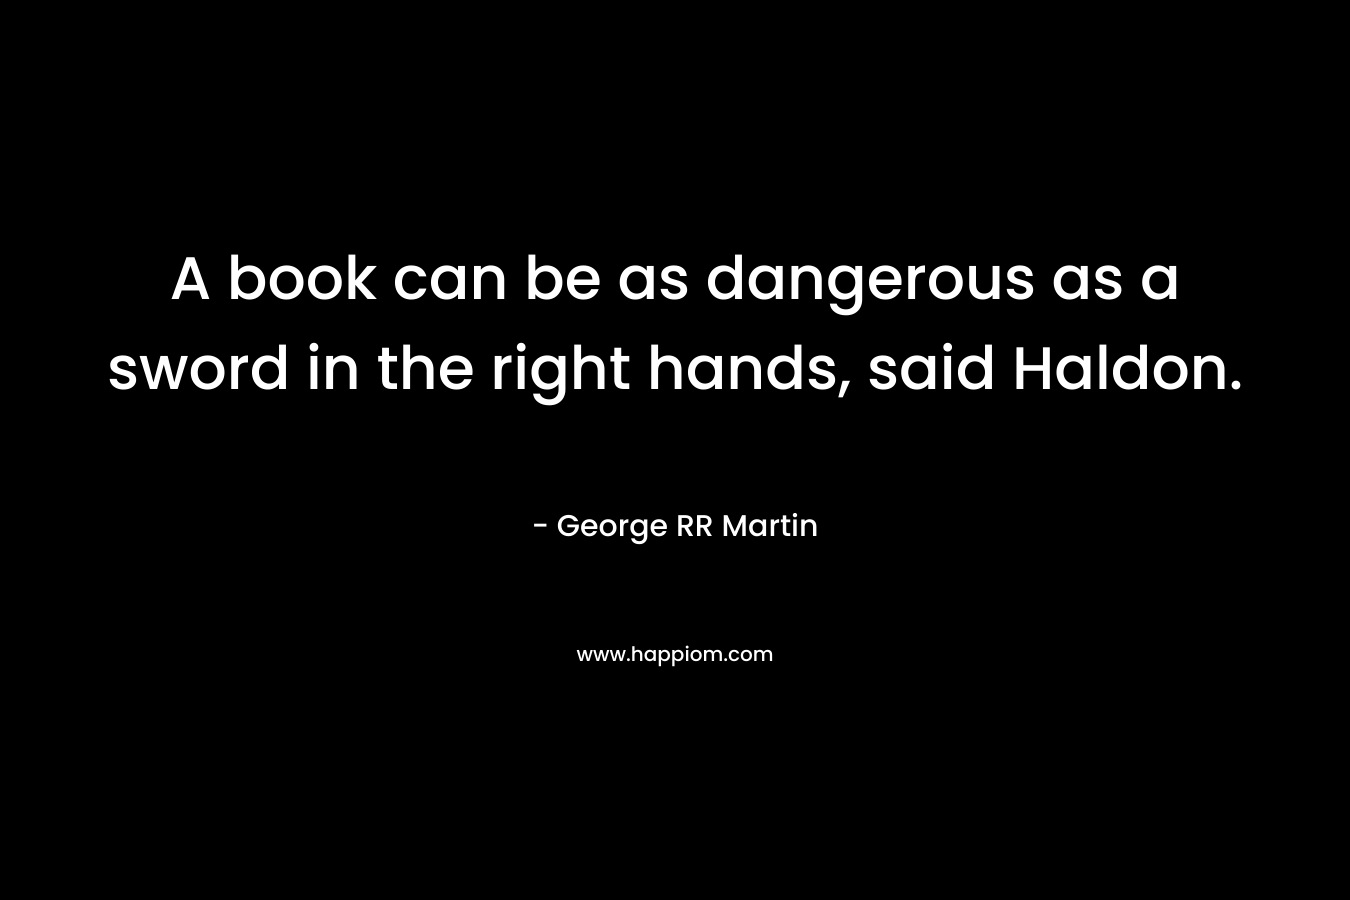 A book can be as dangerous as a sword in the right hands, said Haldon.